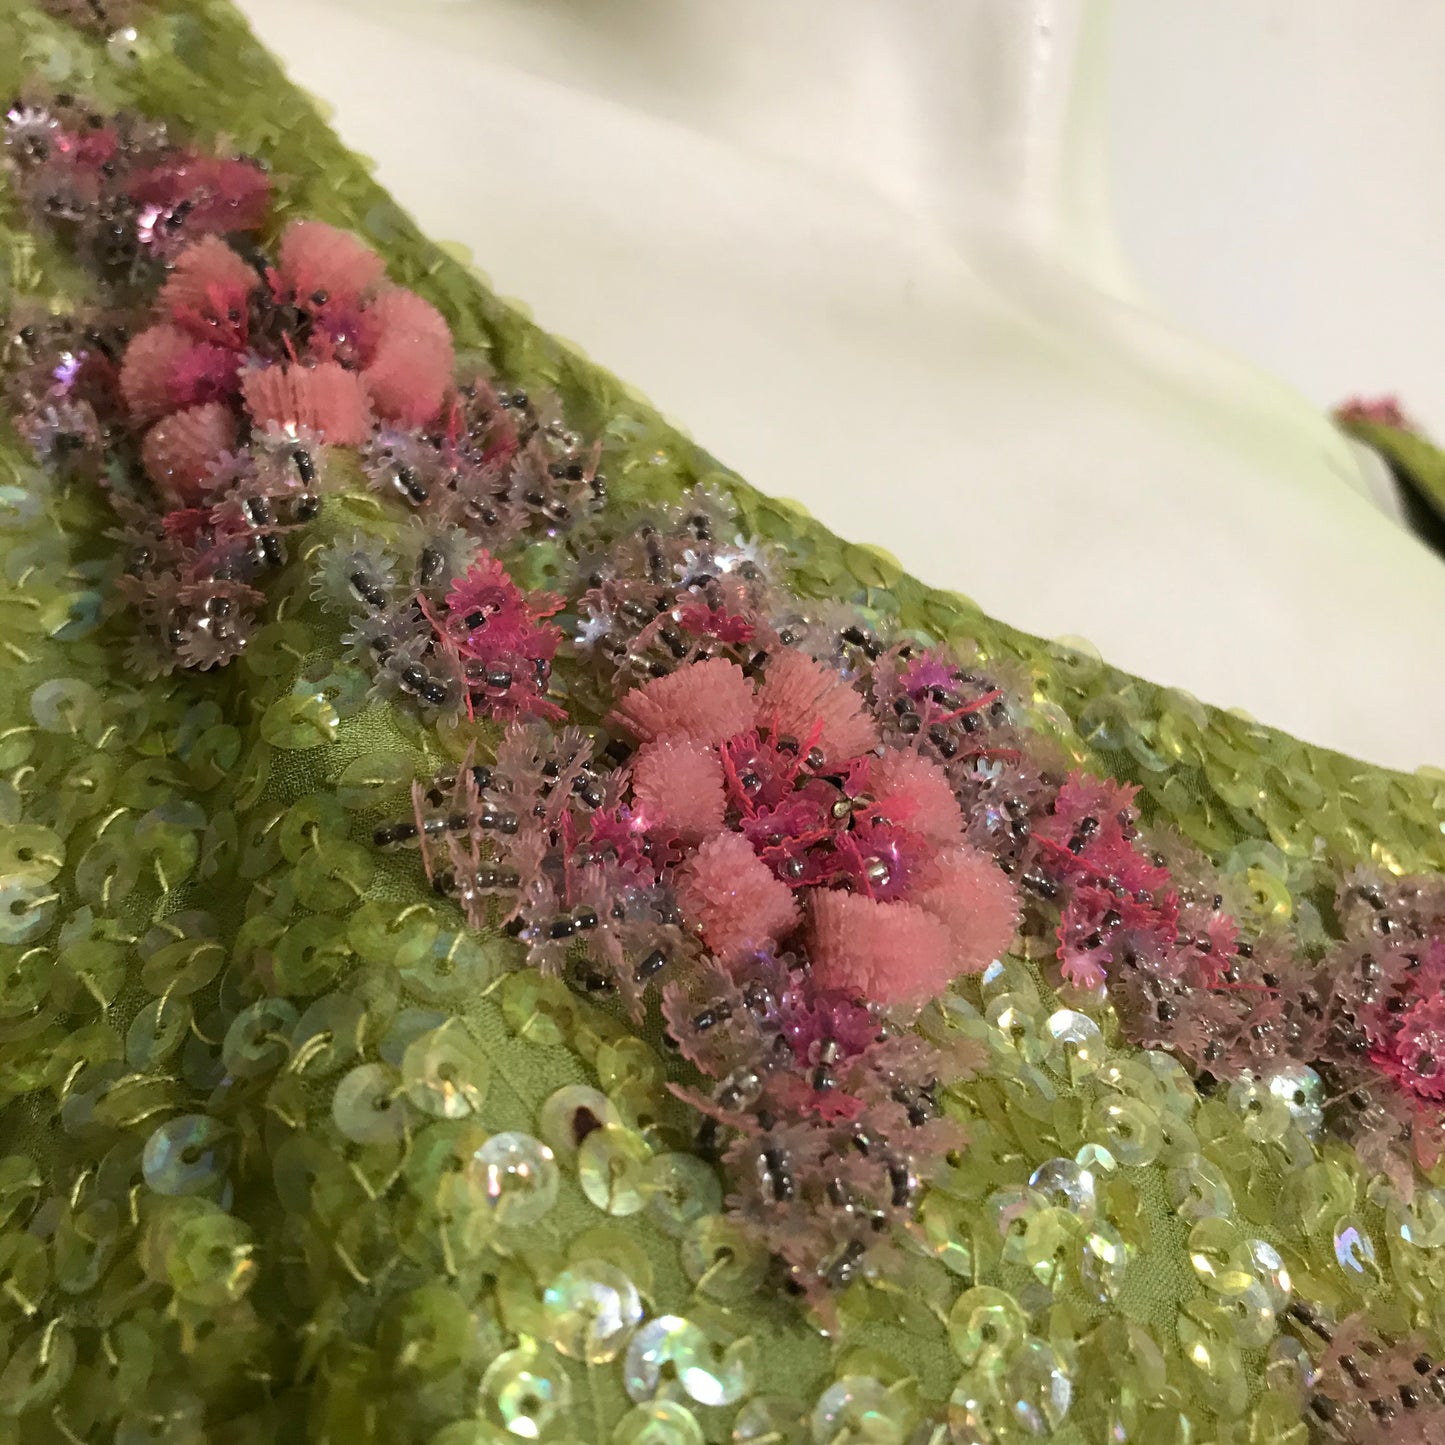 Chartreuse Glam Sequined Cocktail Dress with 3-D Pink Floral Accents circa 1960s